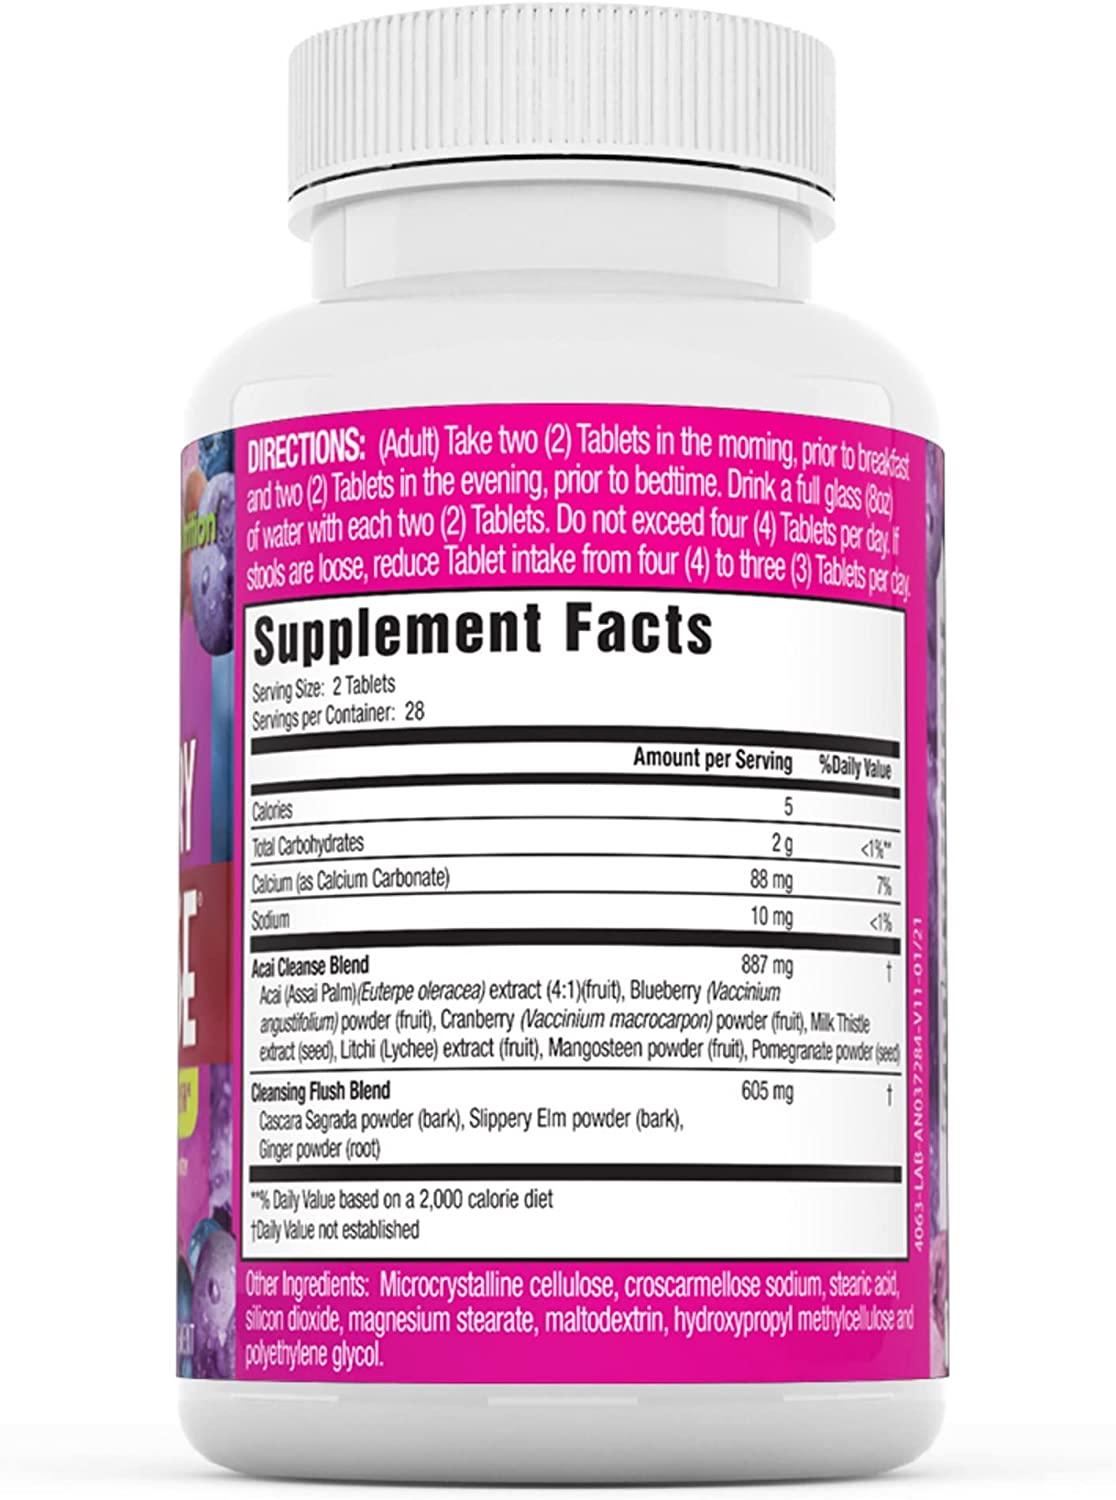 Applied Nutrition Acai Berry Cleanse Weight-Loss Support Flush Supplement Tablet, 56 Ct - image 5 of 7